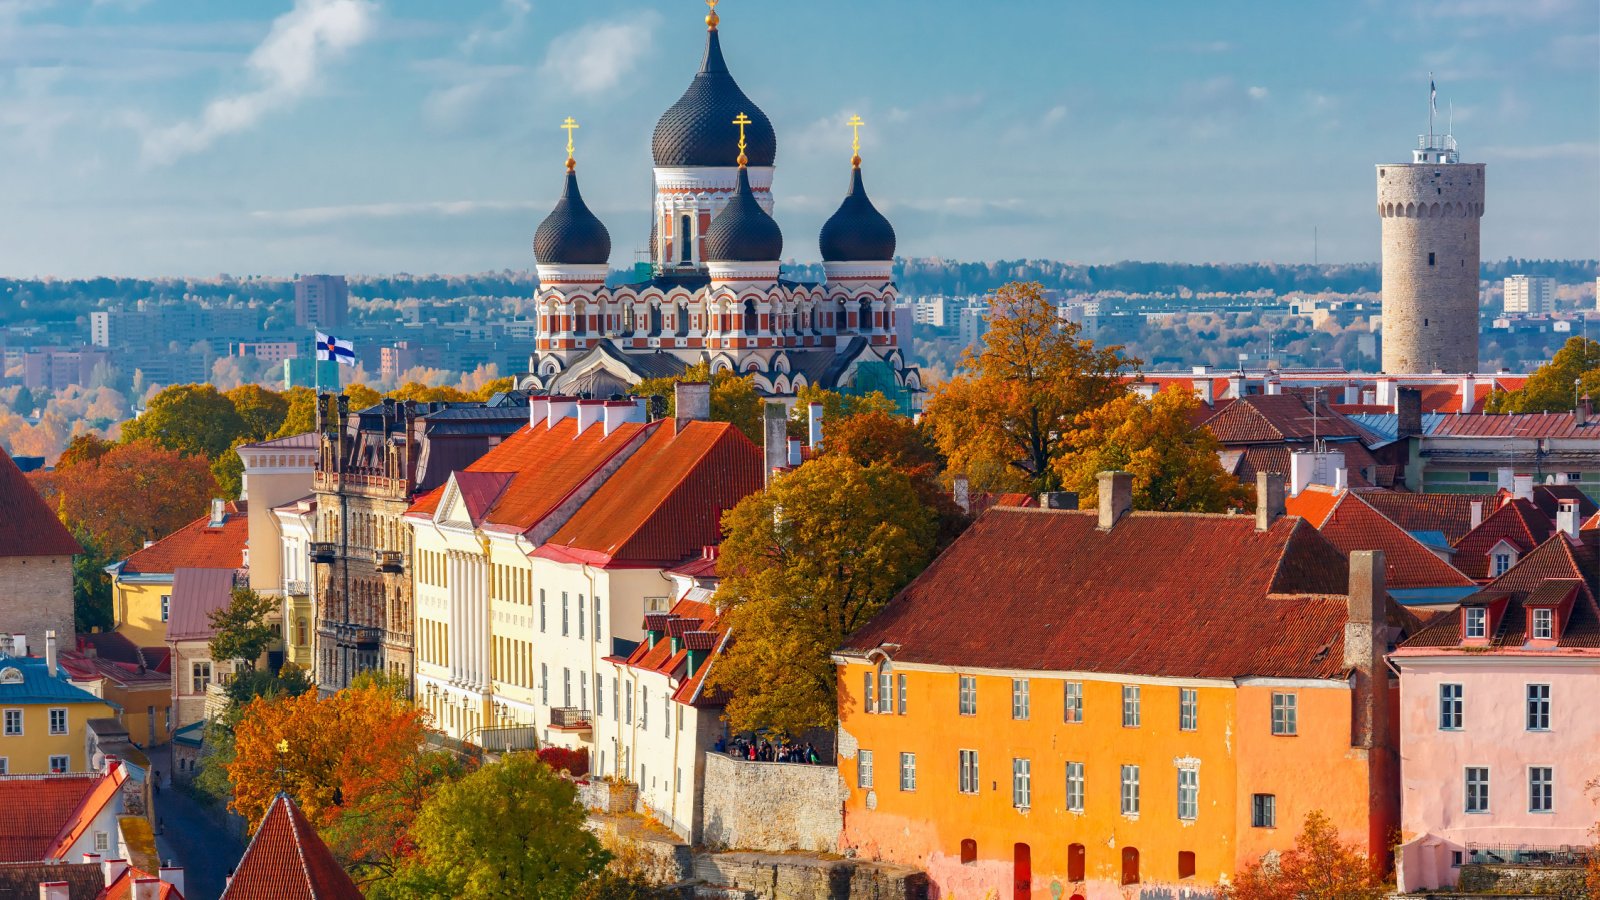 <p>Even though Estonia has been linked with Russia as part of the former Soviet Union, culturally, it shares a closer kinship with its neighbor to the north, Finland. Settled on the Baltic Sea and the Gulf of Finland, this European country is known for its rocky, scenic coastline and the capital city of Tallinn’s charming old town.</p>